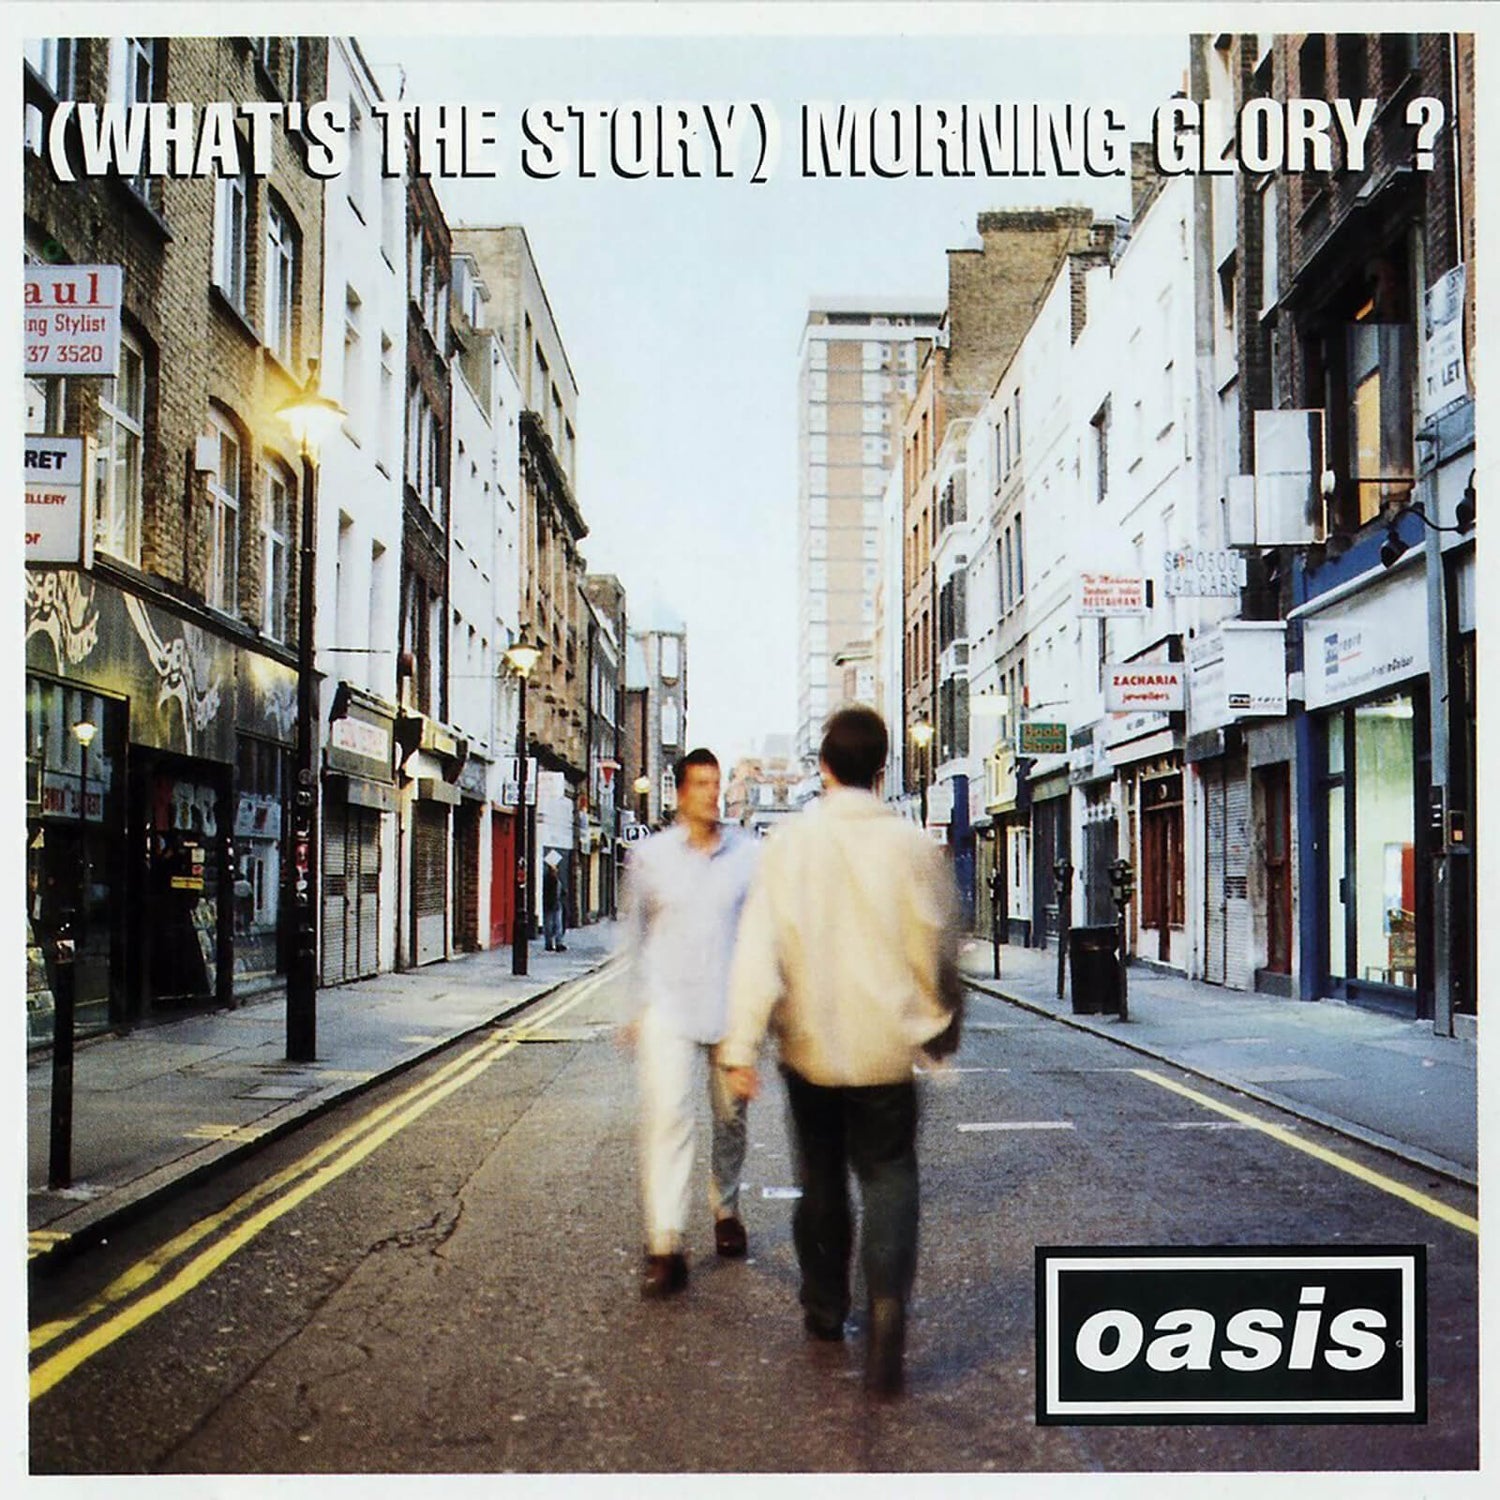 Oasis - (Whats The Story) Morning Glory - Vinyl